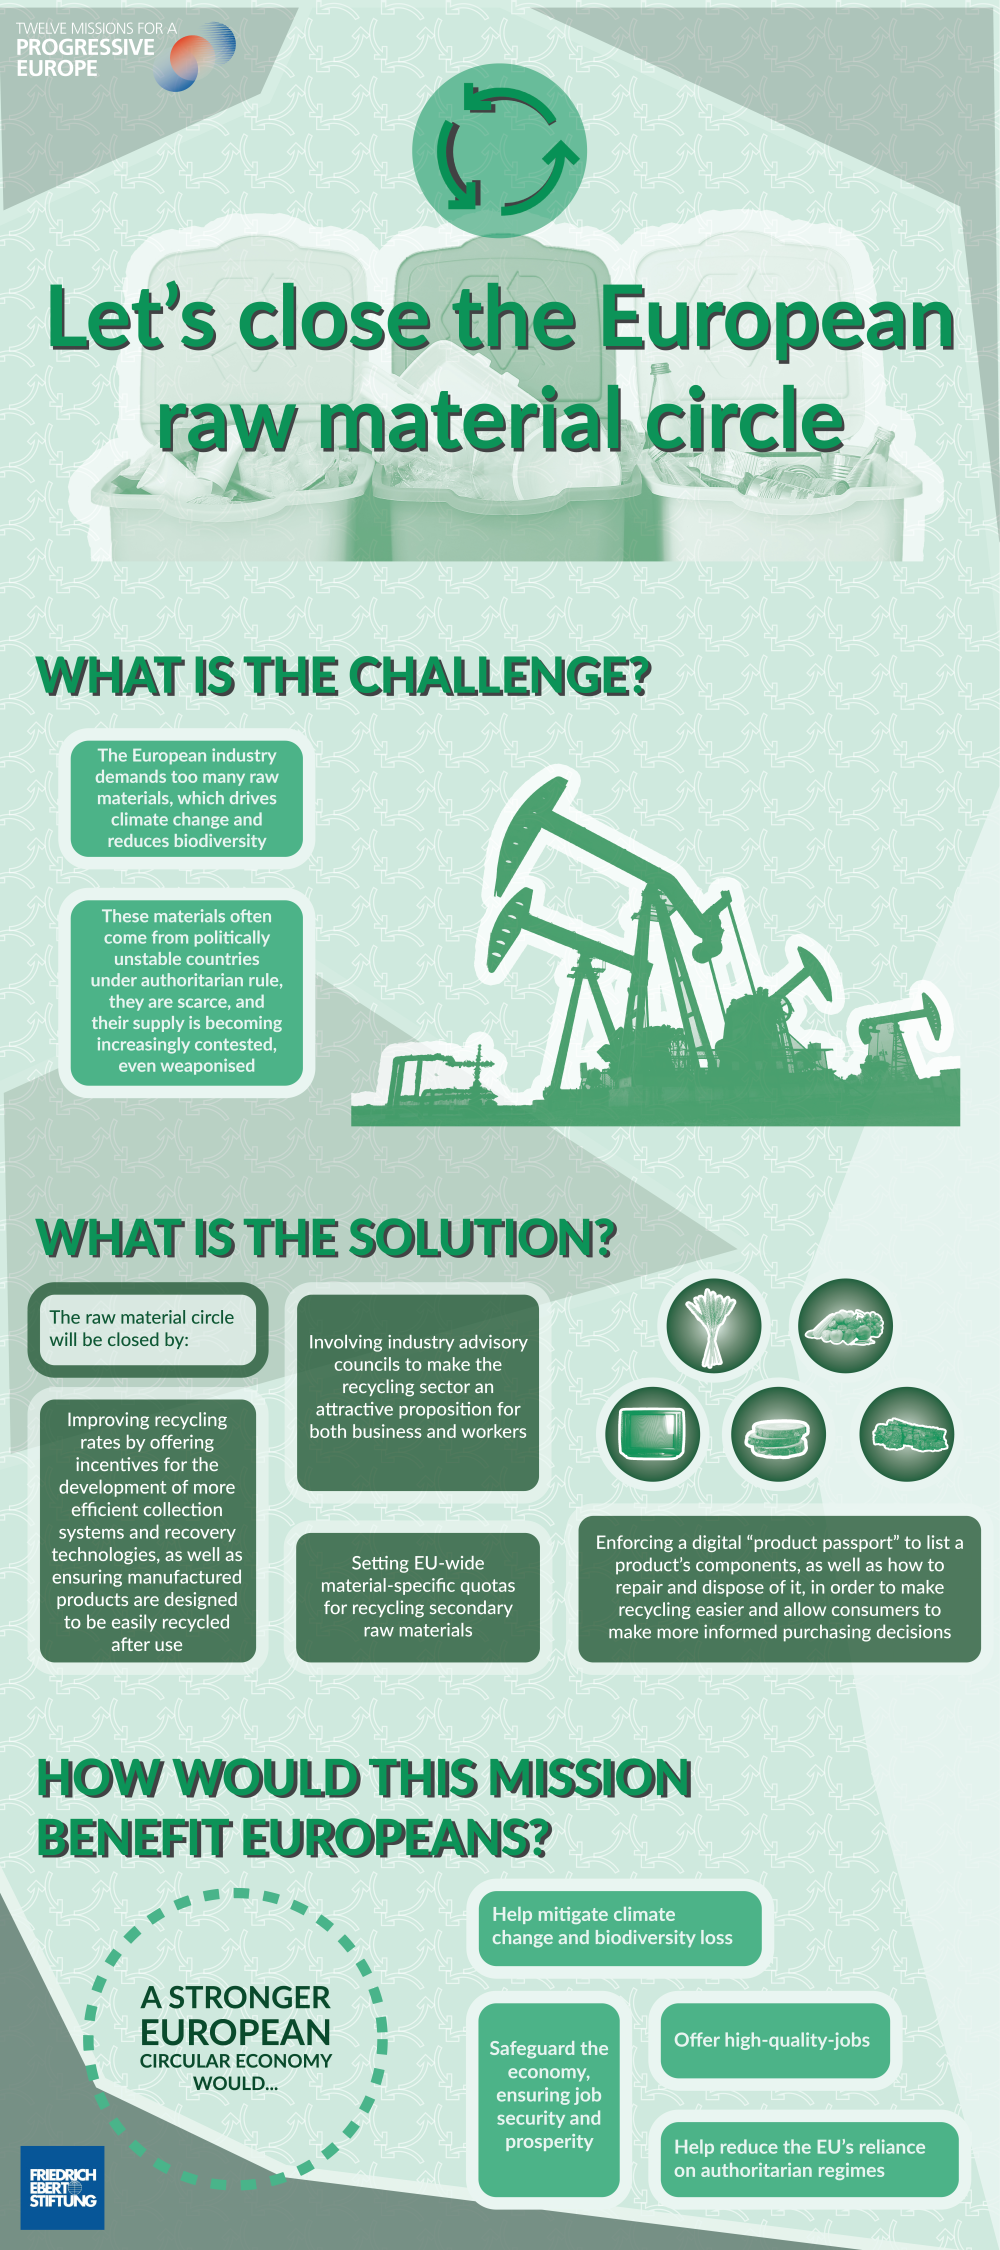 Infographic to Mission: To close the European raw material circle 